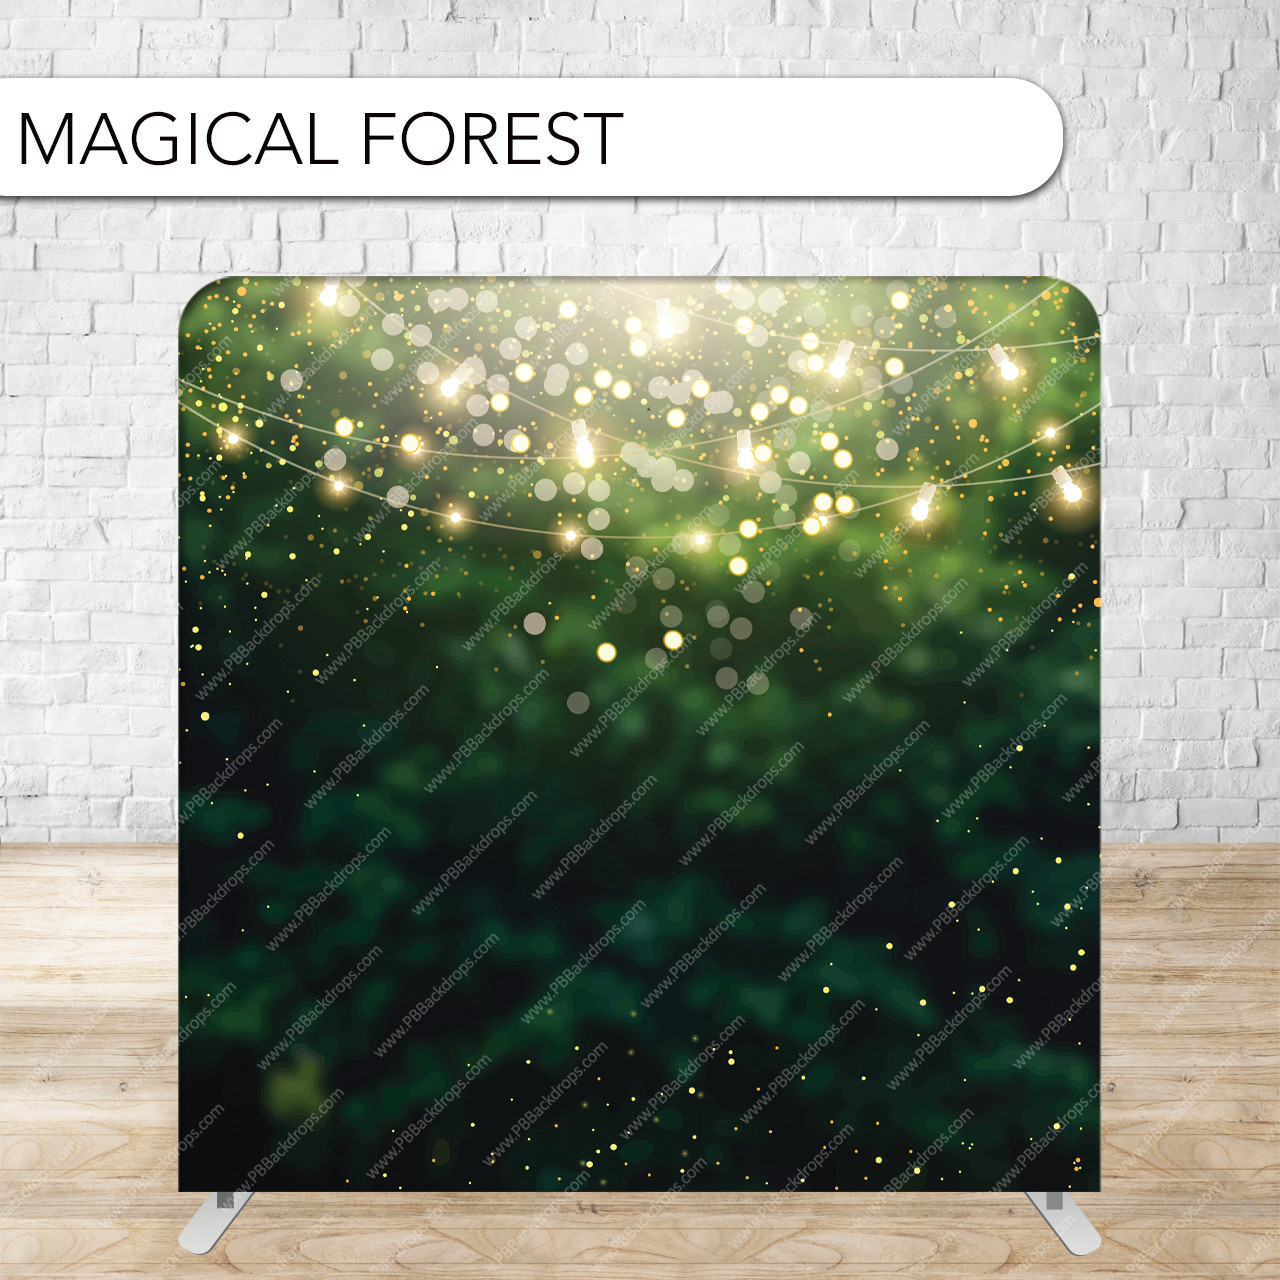 magical_forest_pb__10344